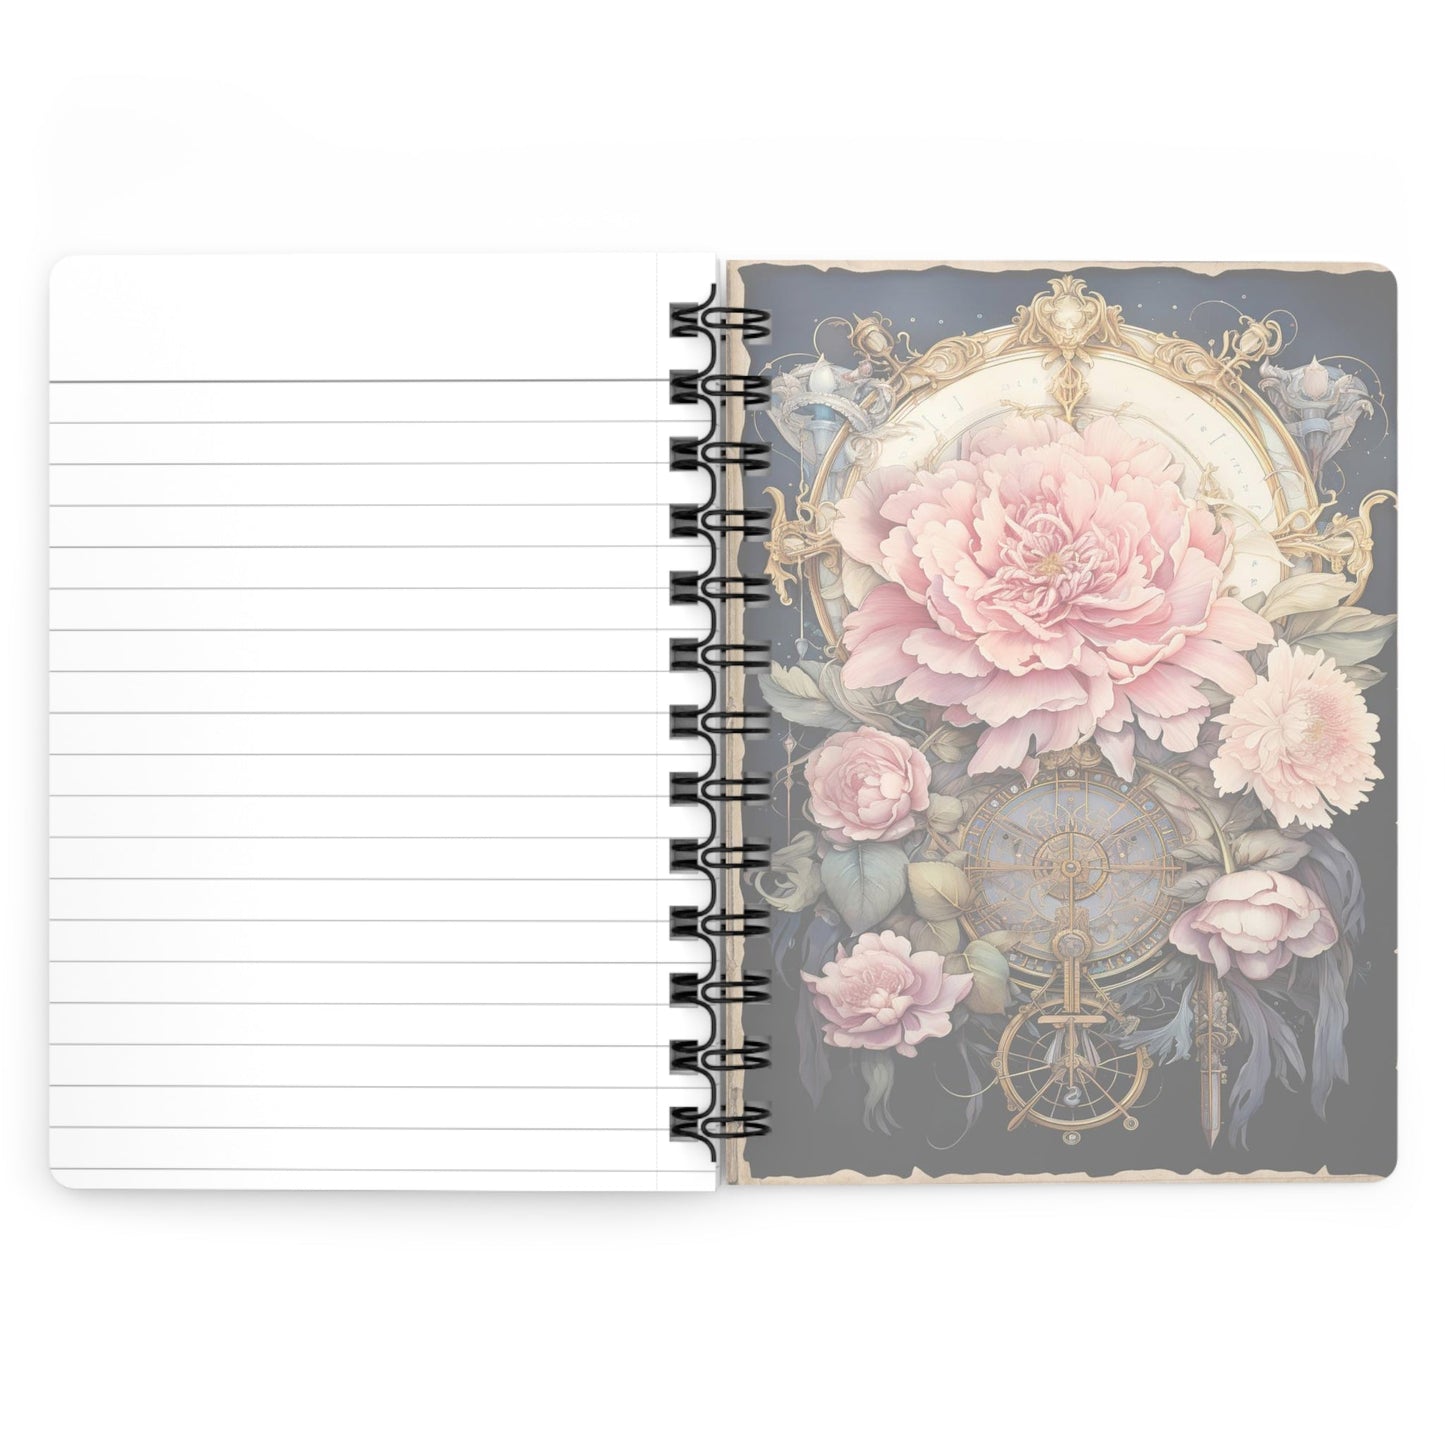 CrazyYetiClothing, CYC, Taurus - Floral Collection (Spiral Bound Journal), Paper products